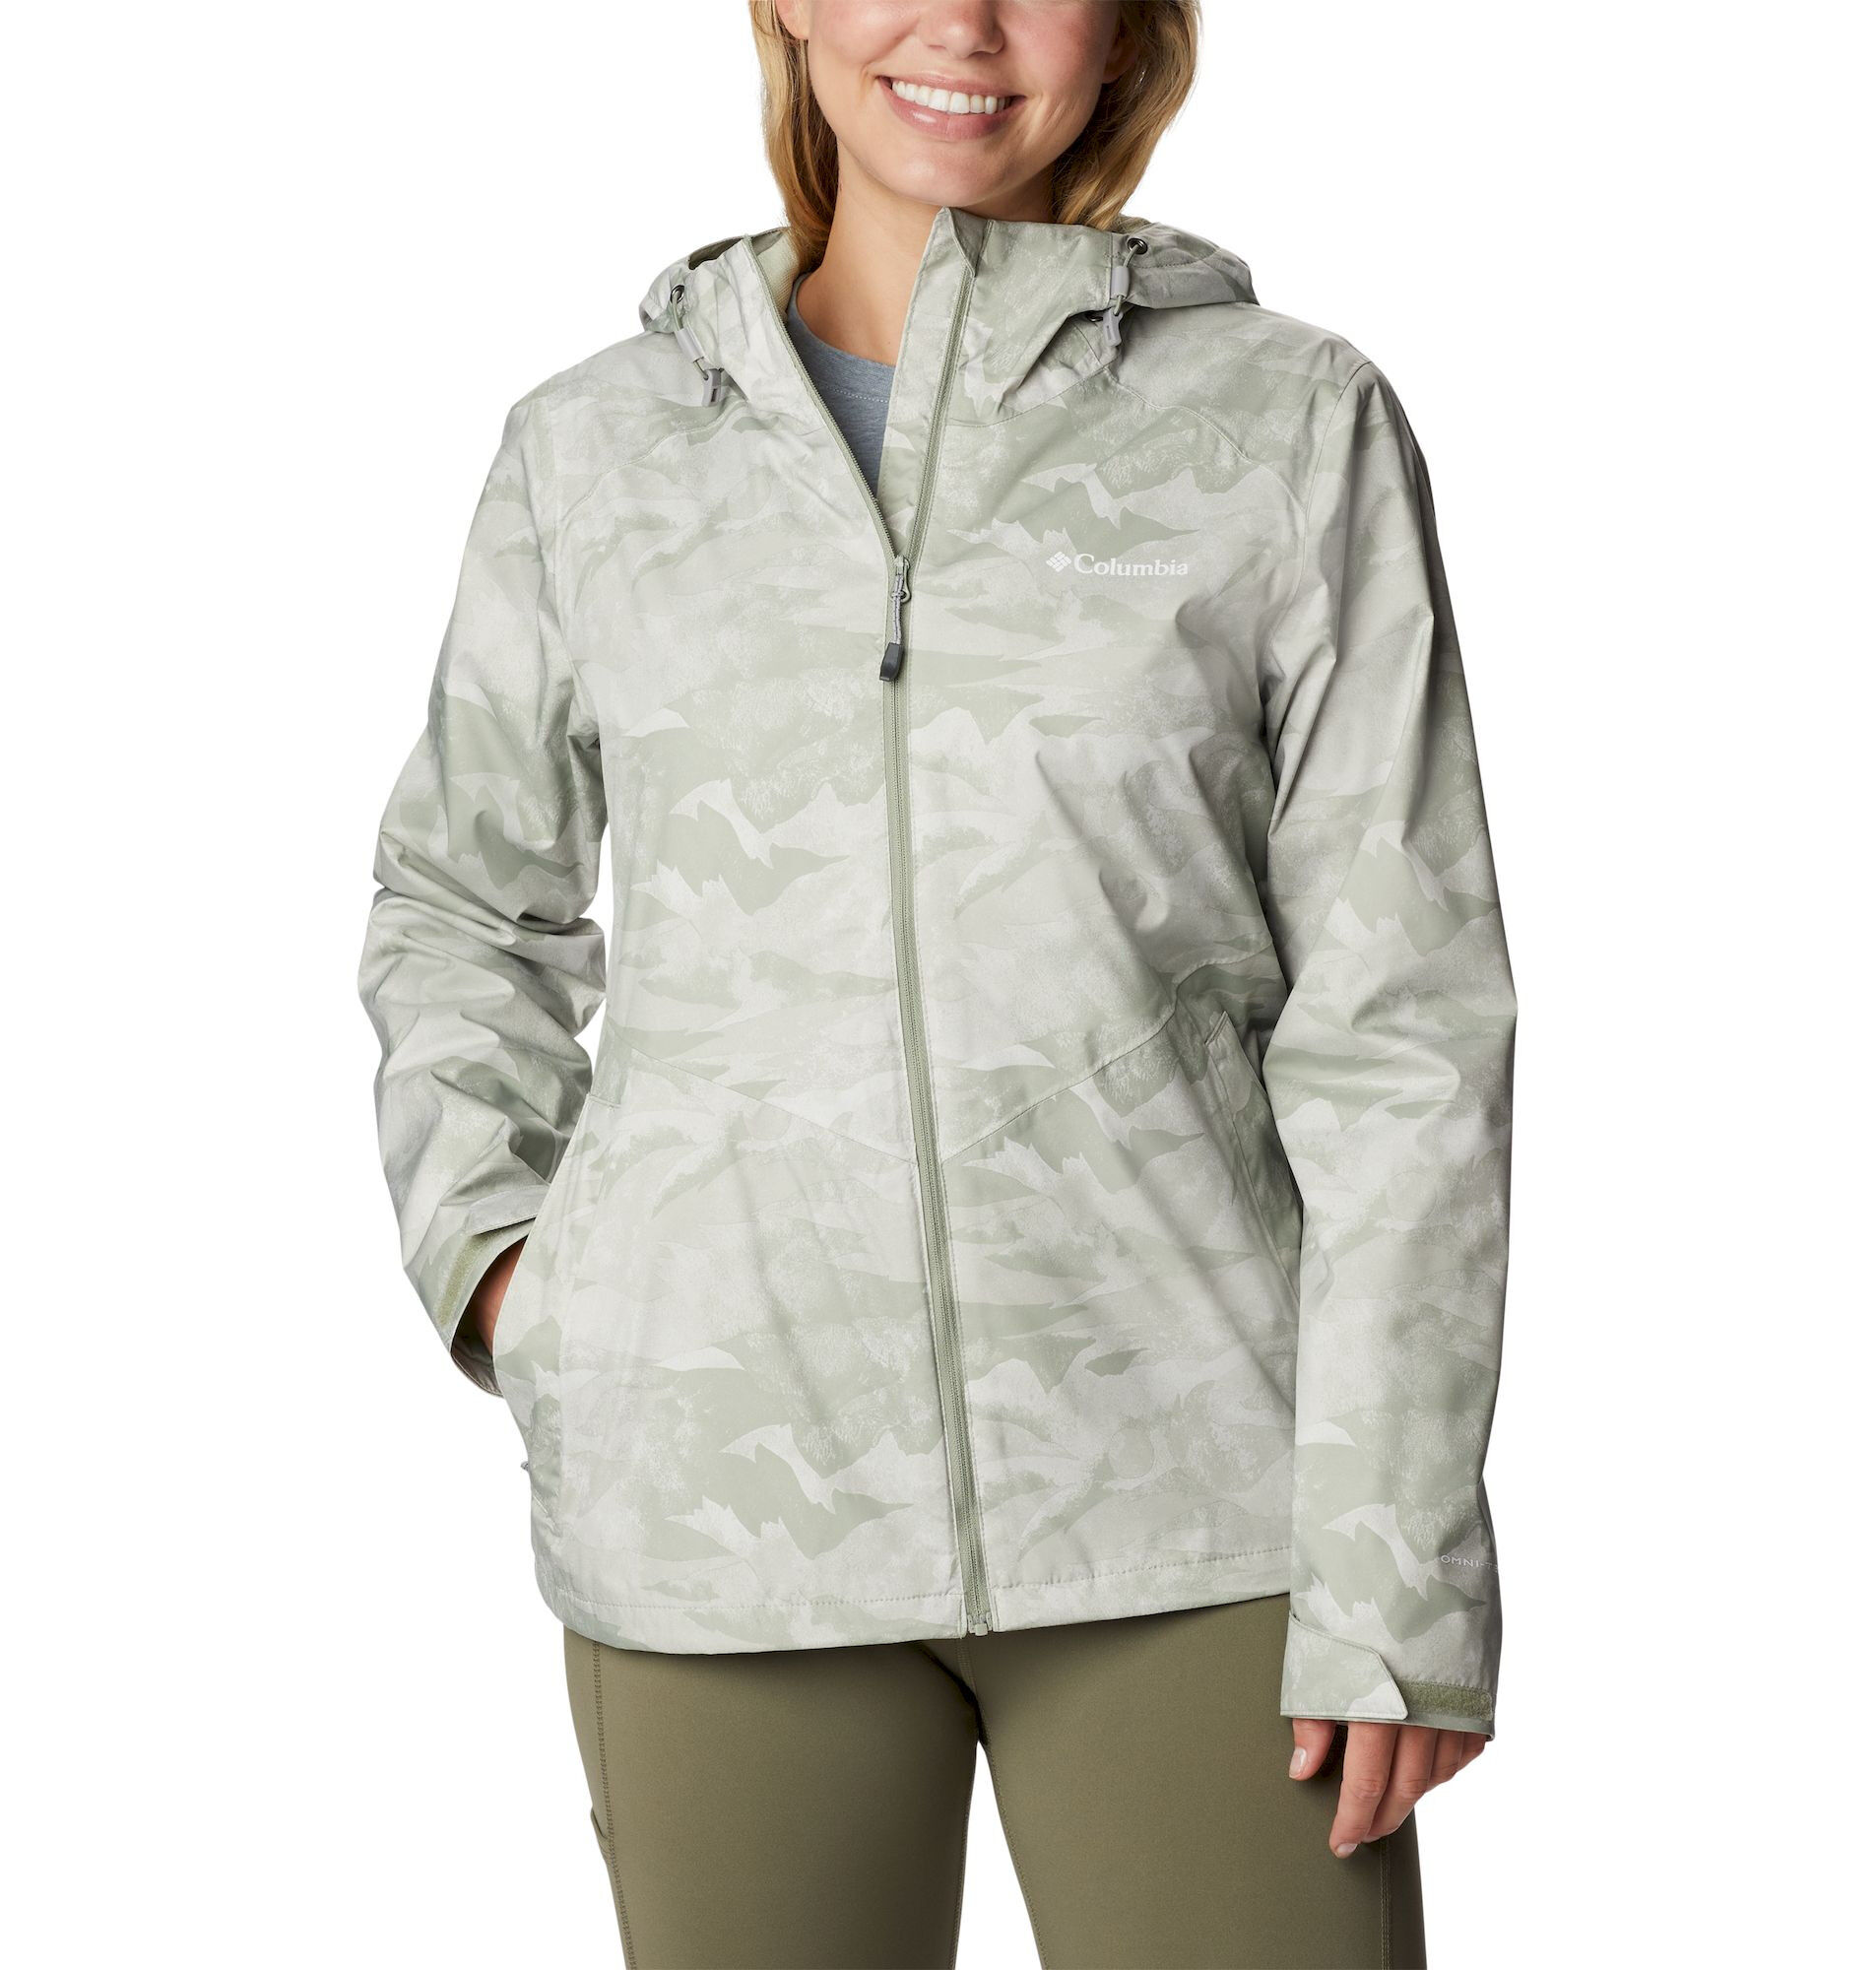 Columbia Inner Limits II Jacket - Chaqueta impermeable - Mujer